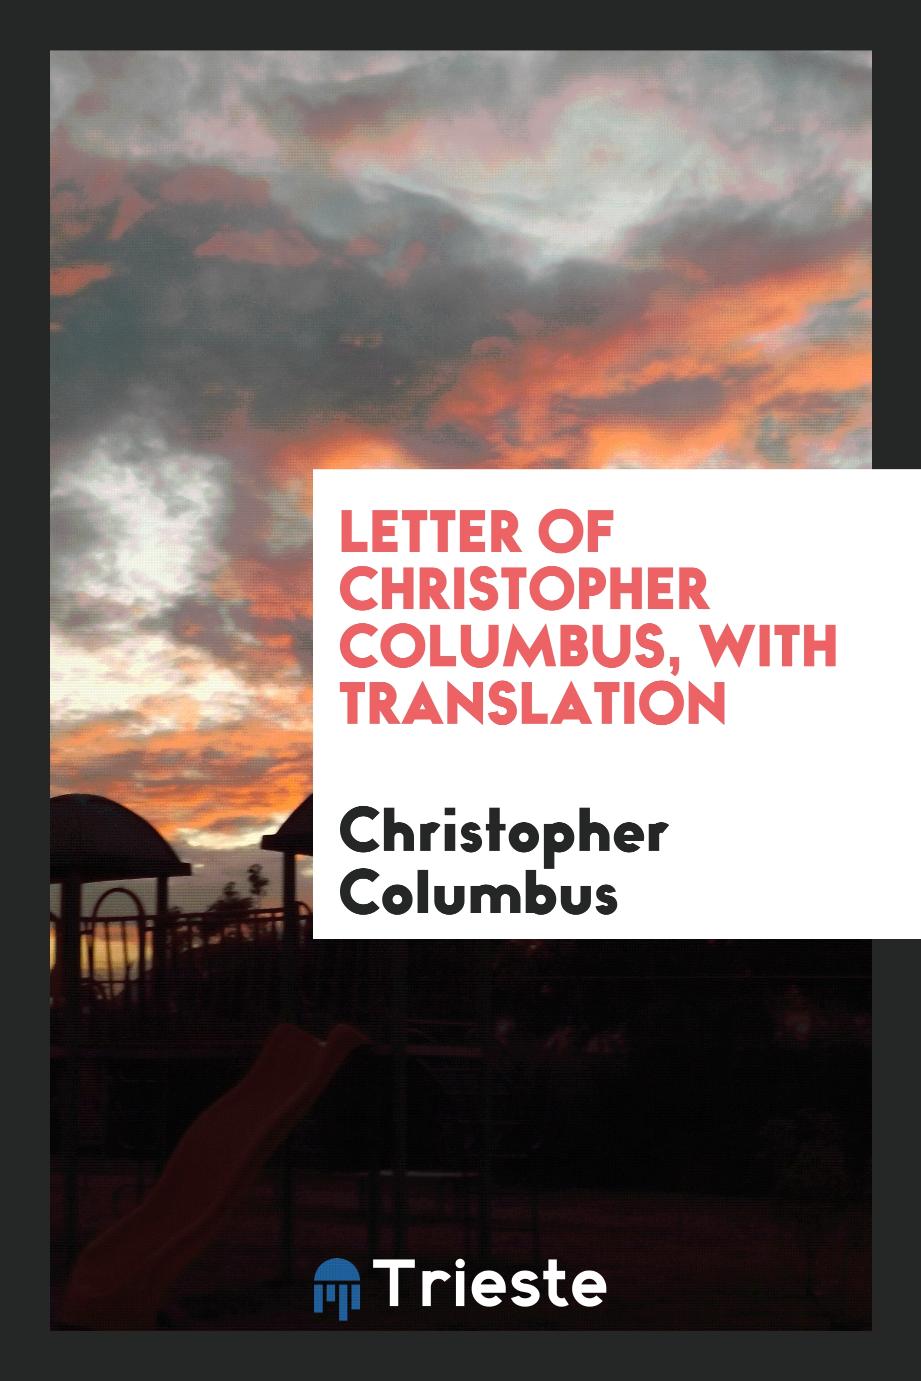 Letter of Christopher Columbus, with translation